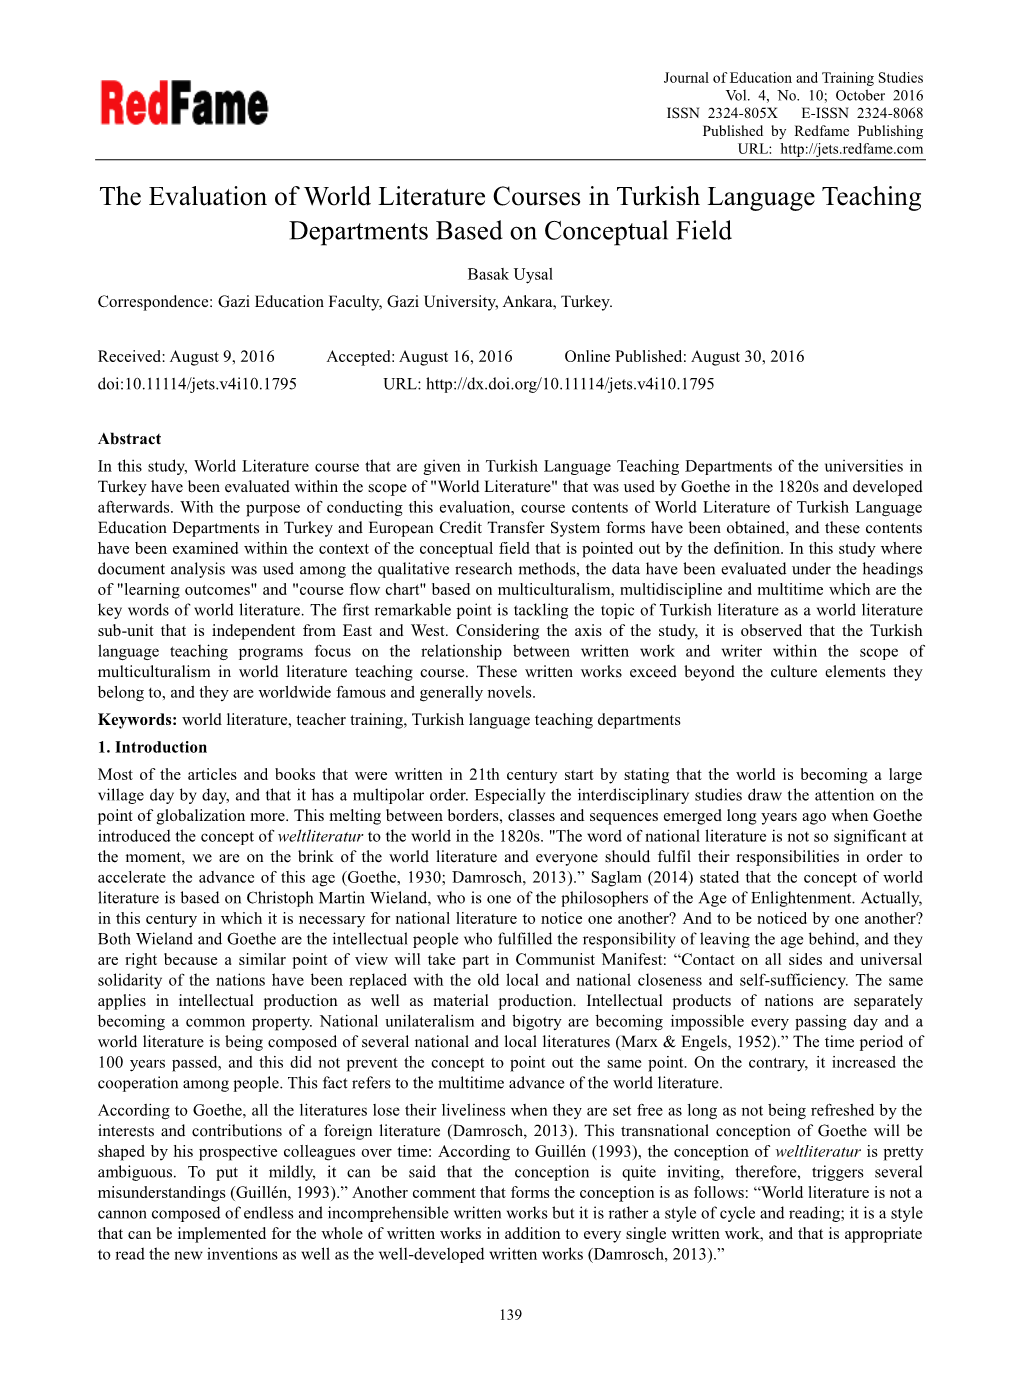 The Evaluation of World Literature Courses in Turkish Language Teaching Departments Based on Conceptual Field